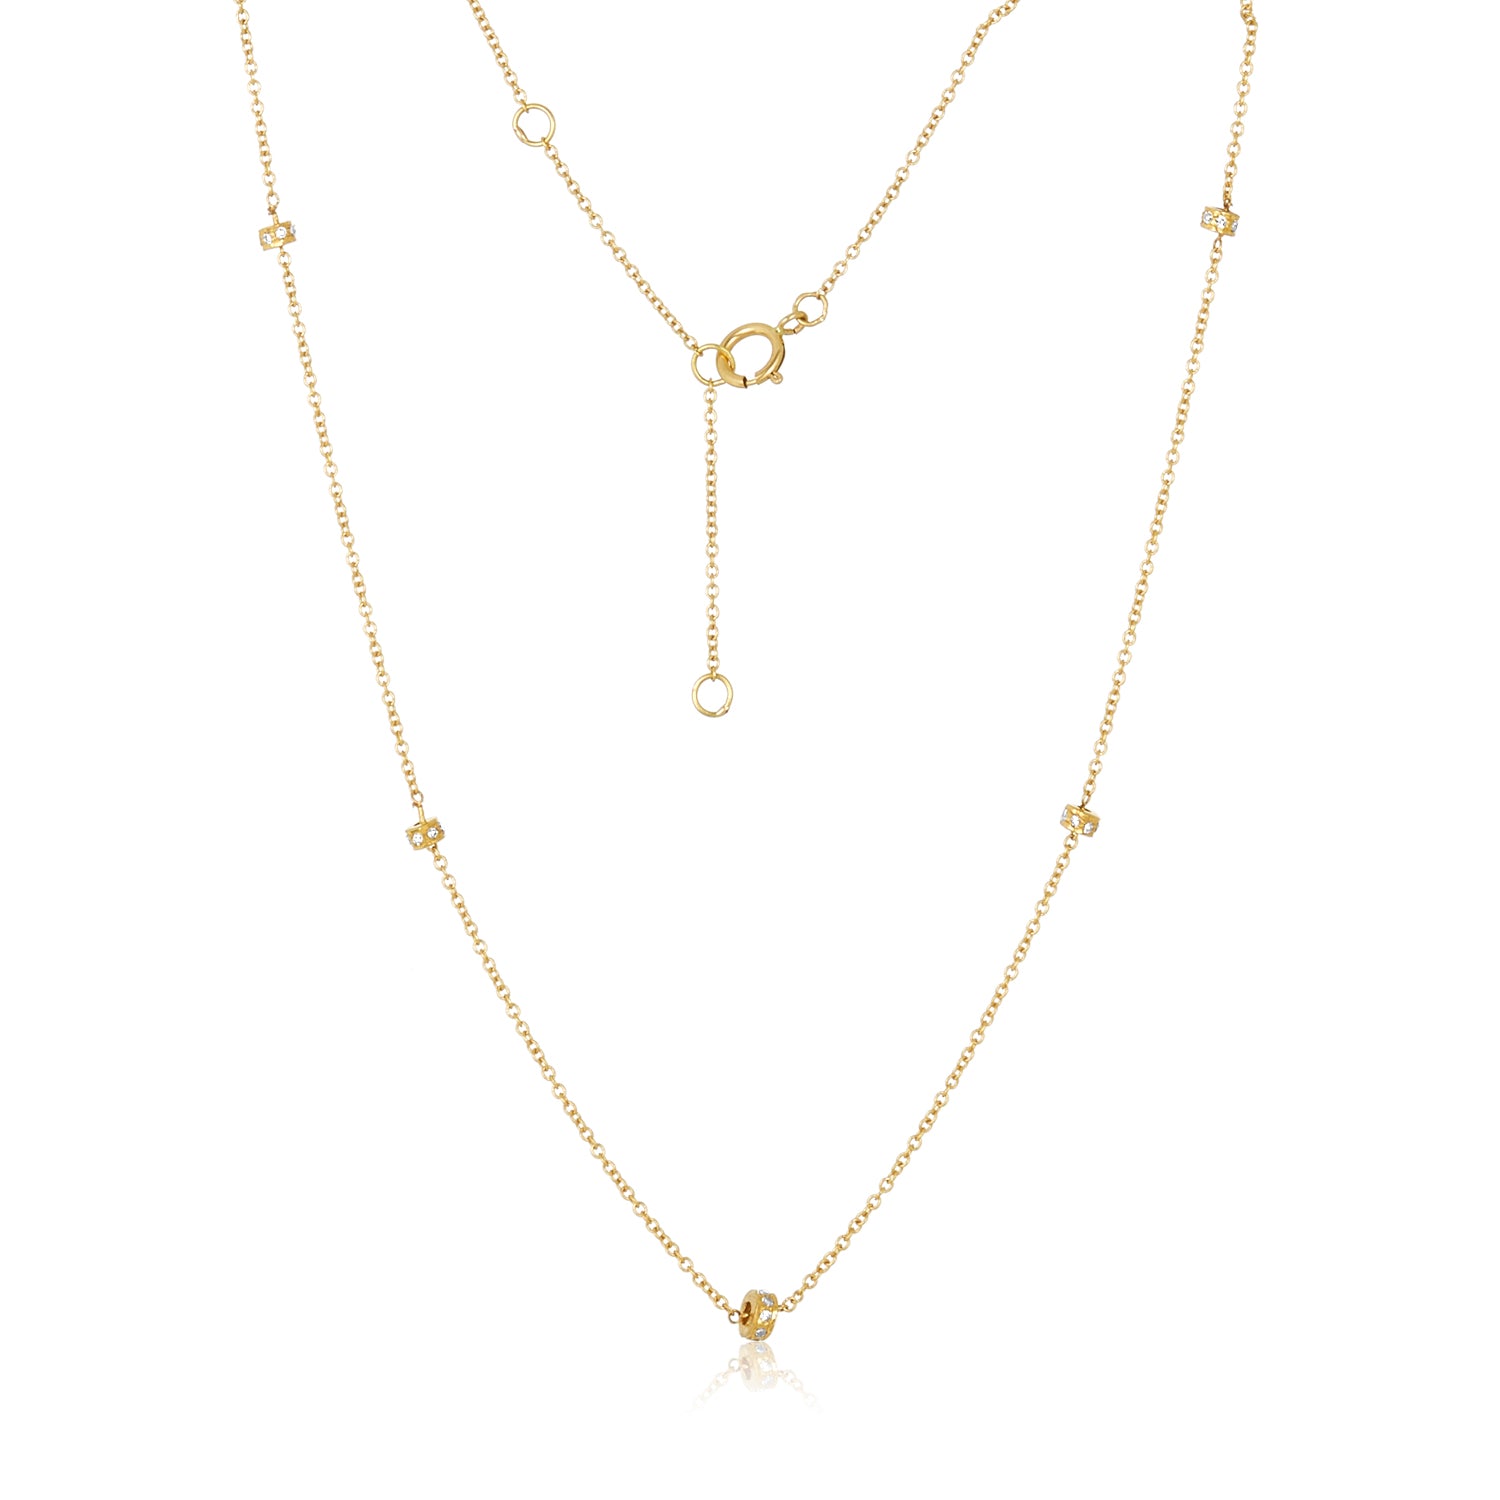 Diamond Barrel Section Necklace in 18k